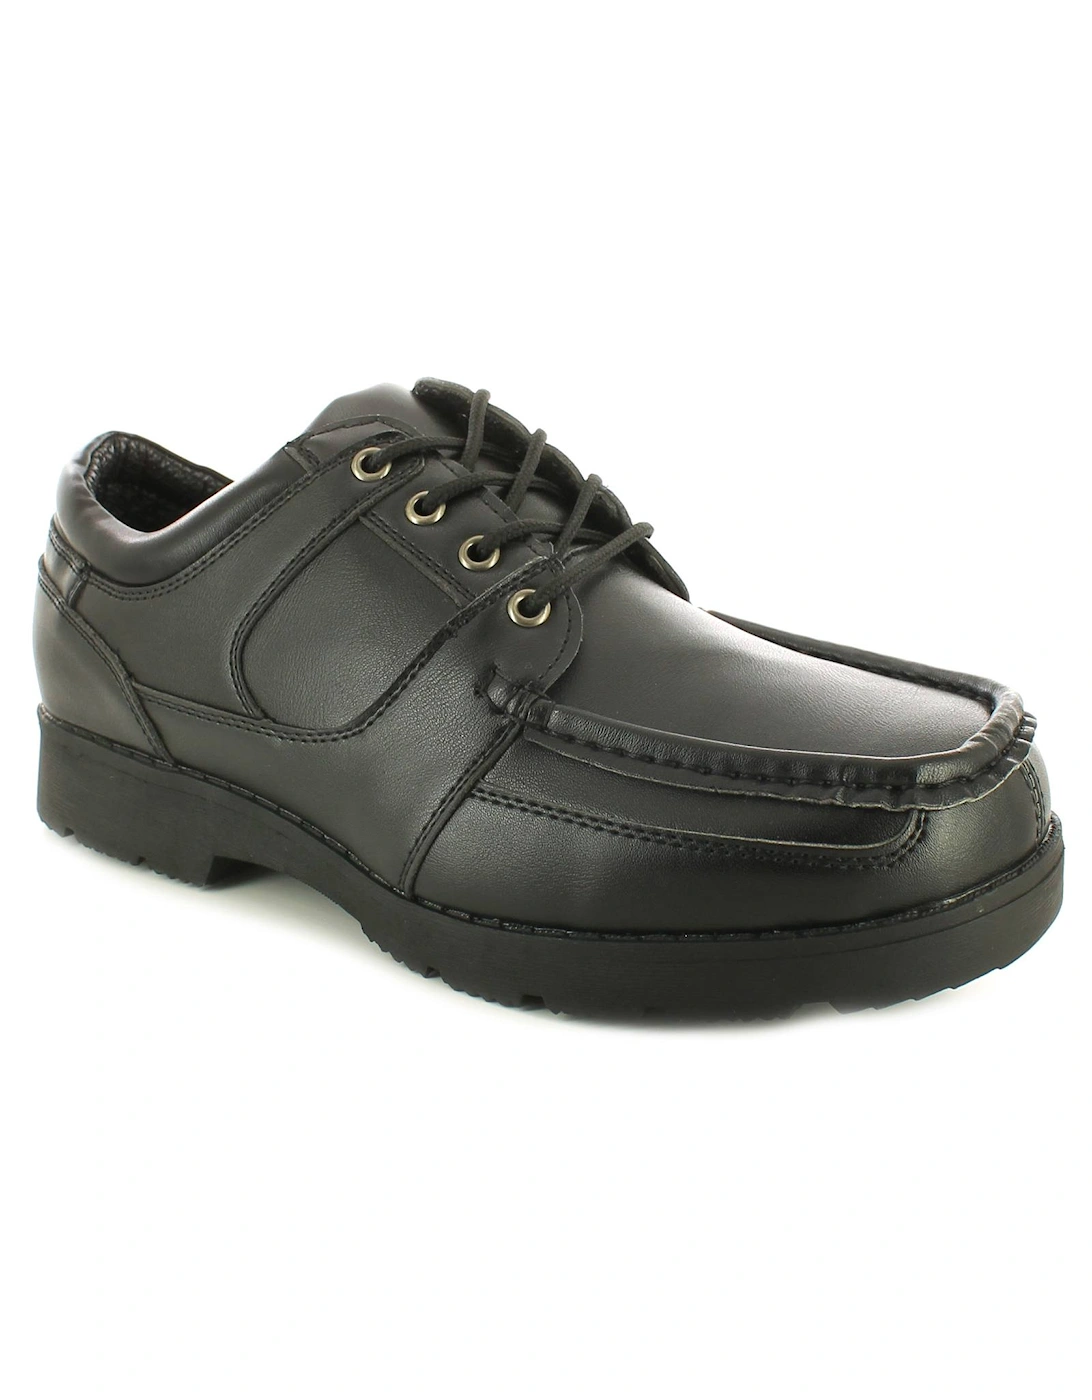 Mens Shoes Work School Hunter 3 Lace Up black UK Size, 6 of 5